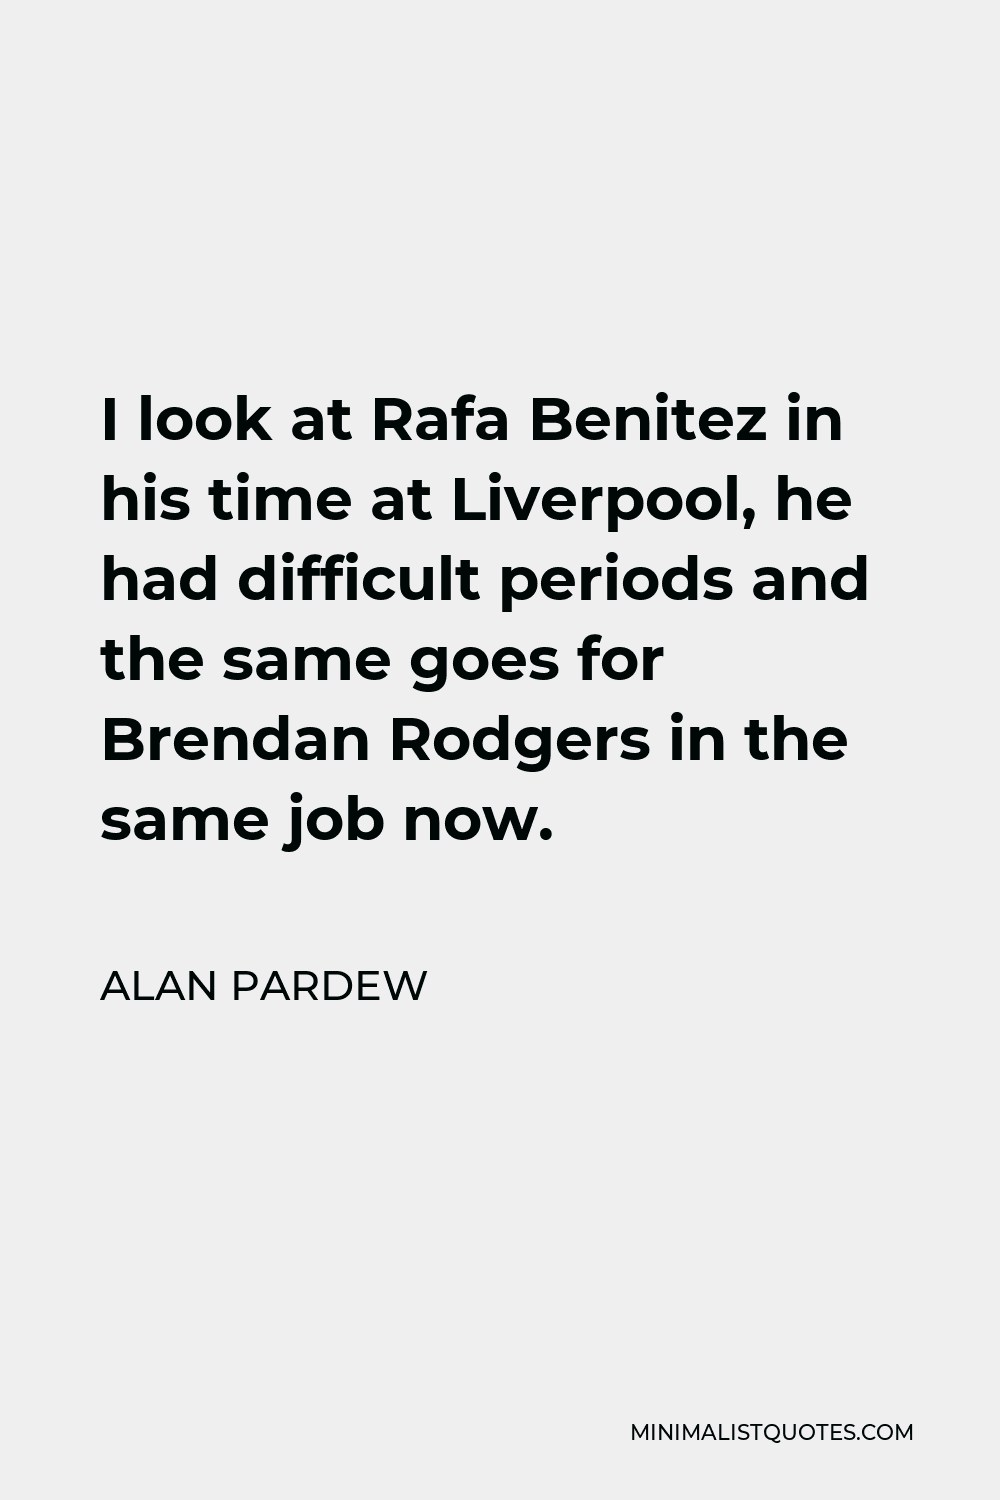 Alan Pardew Quote - I look at Rafa Benitez in his time at Liverpool, he had difficult periods and the same goes for Brendan Rodgers in the same job now.